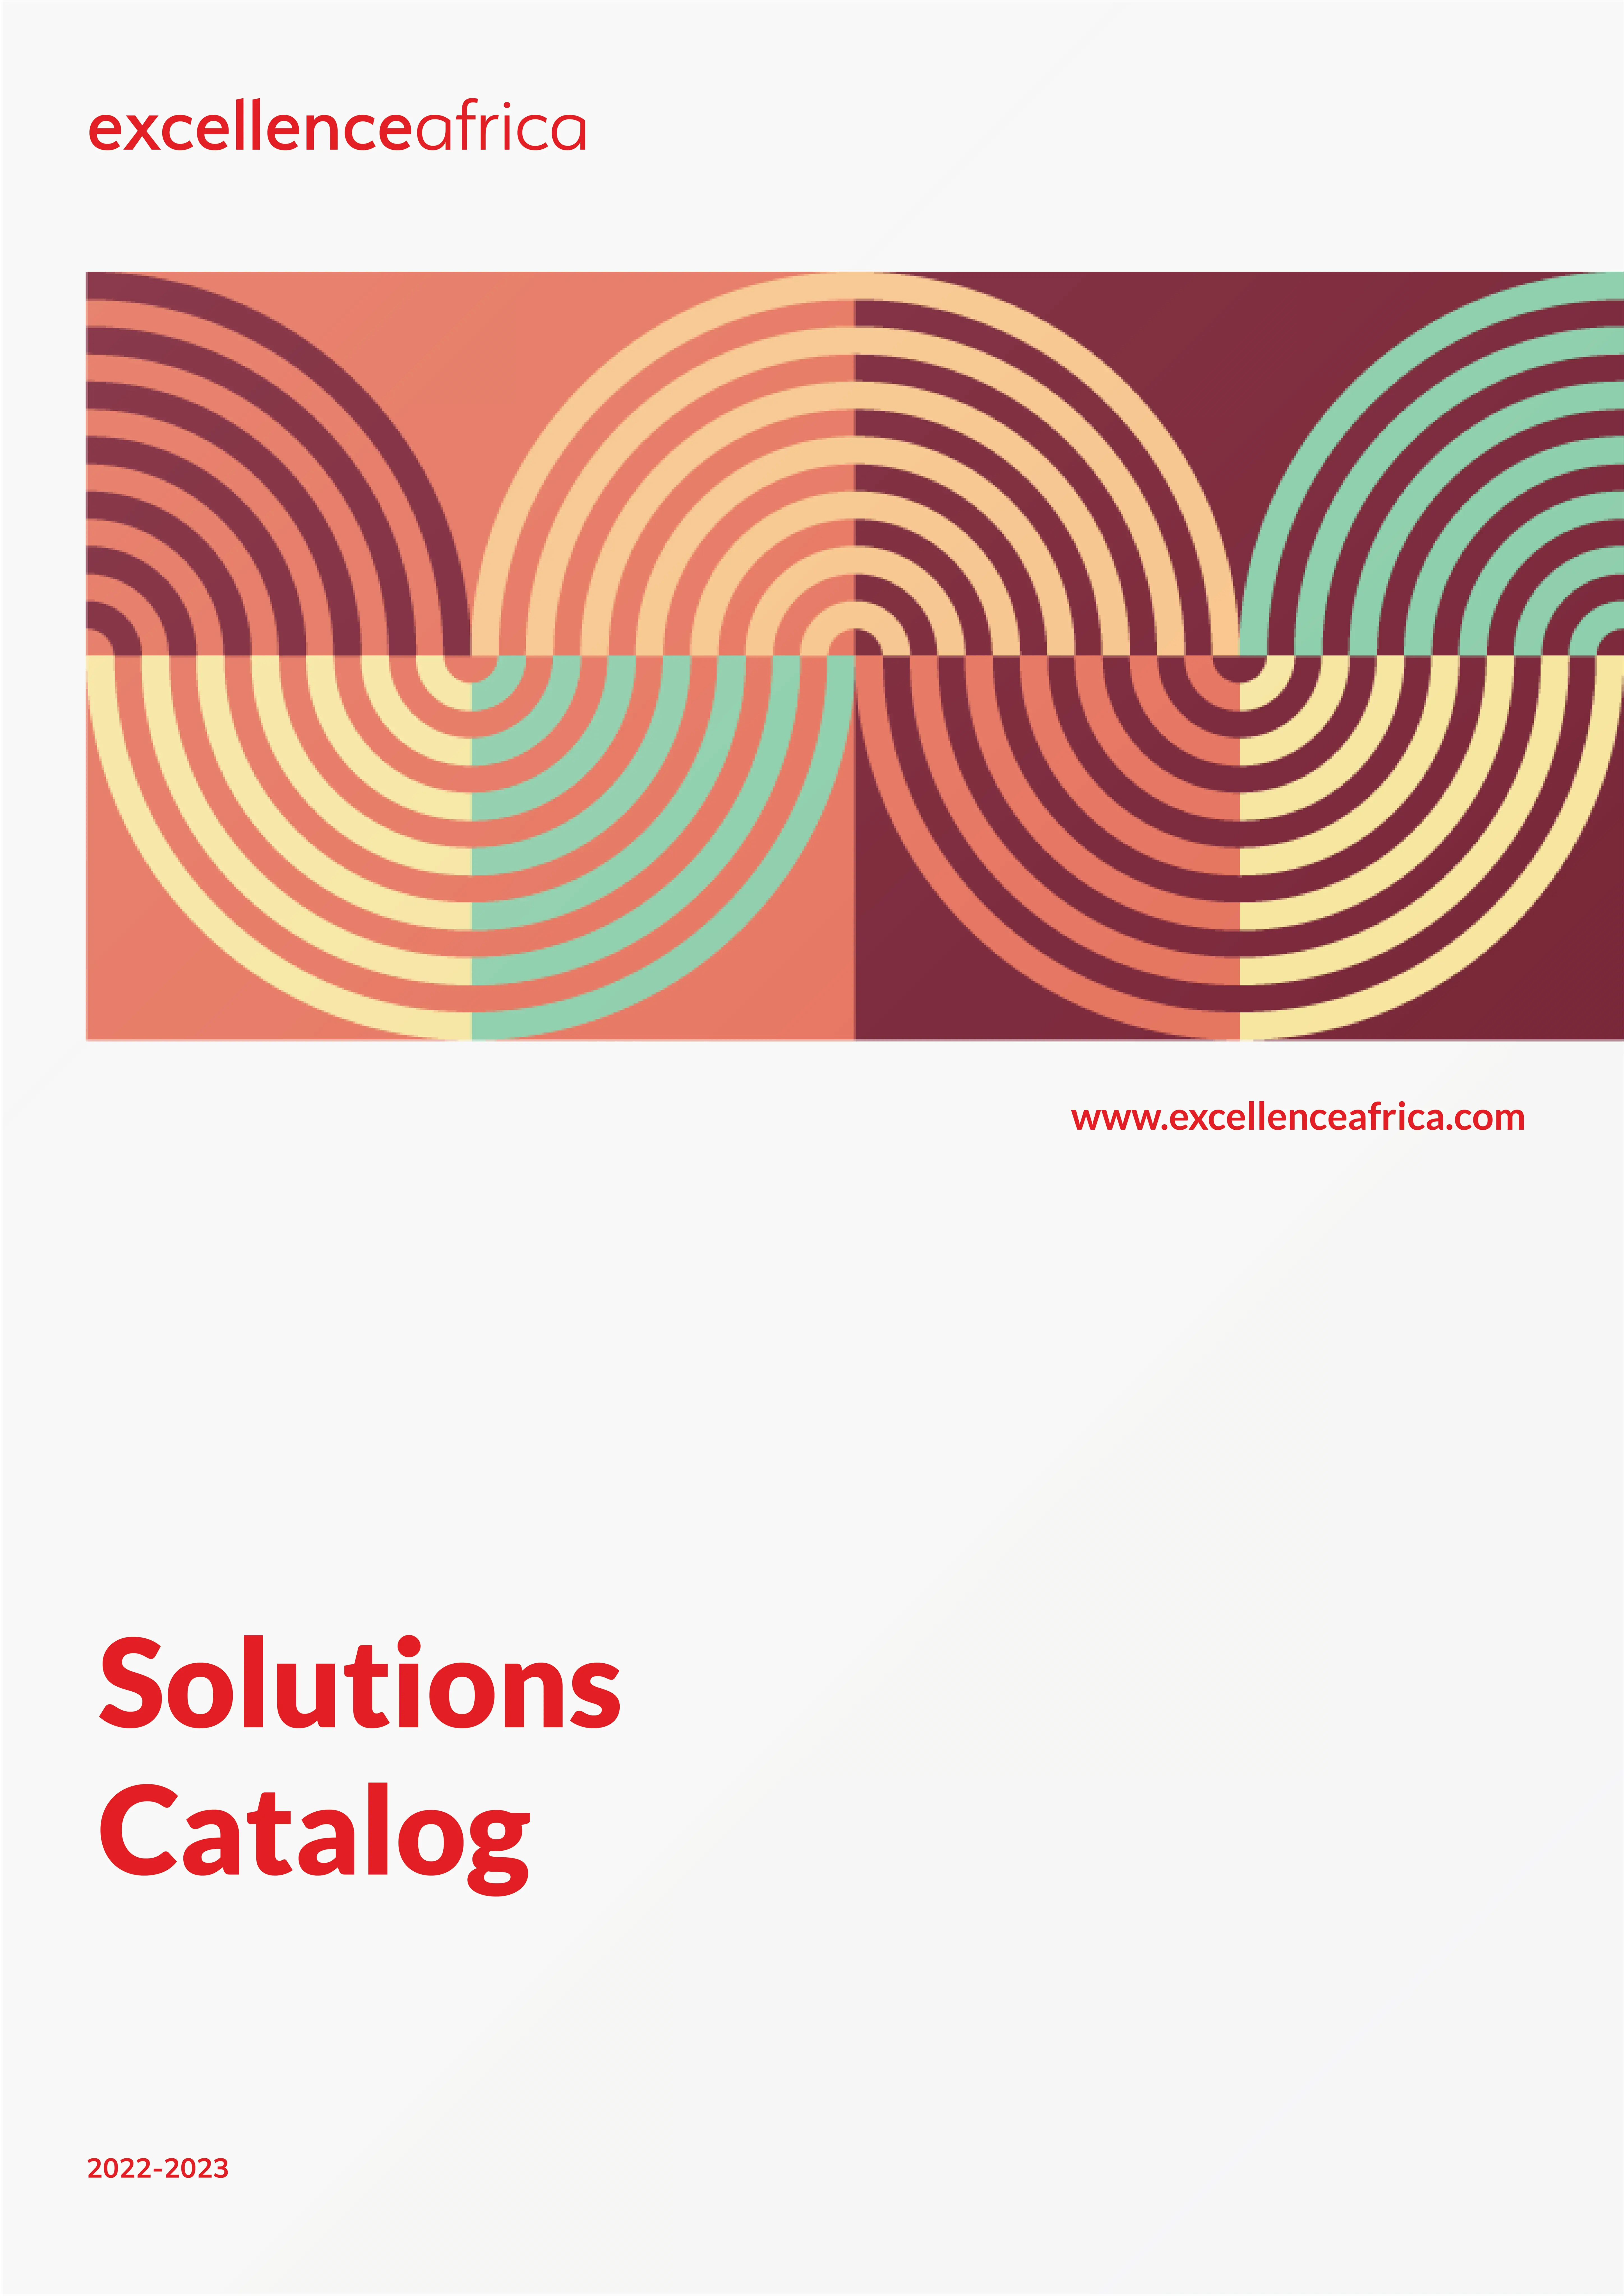 Cover of the excellence's solutions catalog of 2023